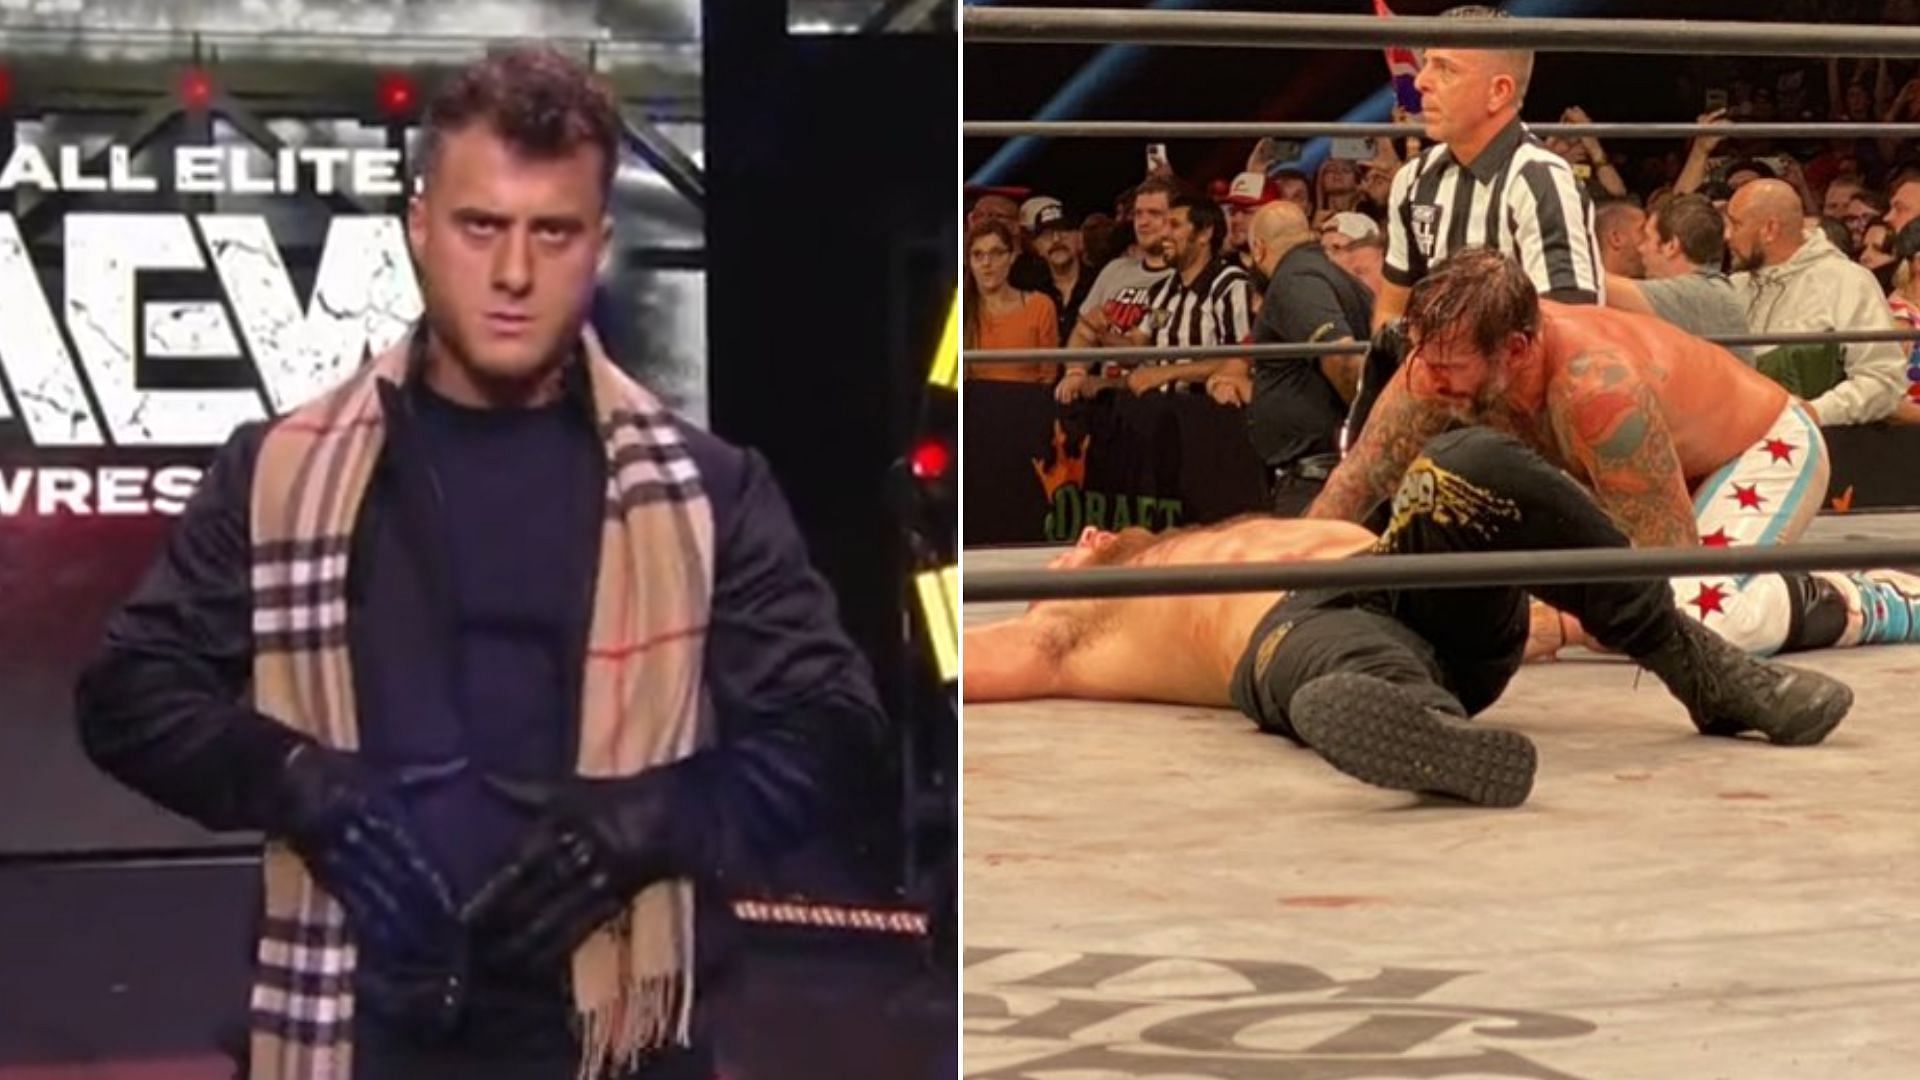 MJF made his return at AEW All Out, CM Punk fought Jon Moxley for the world title (Pic courtesy: @bryanalvarez)